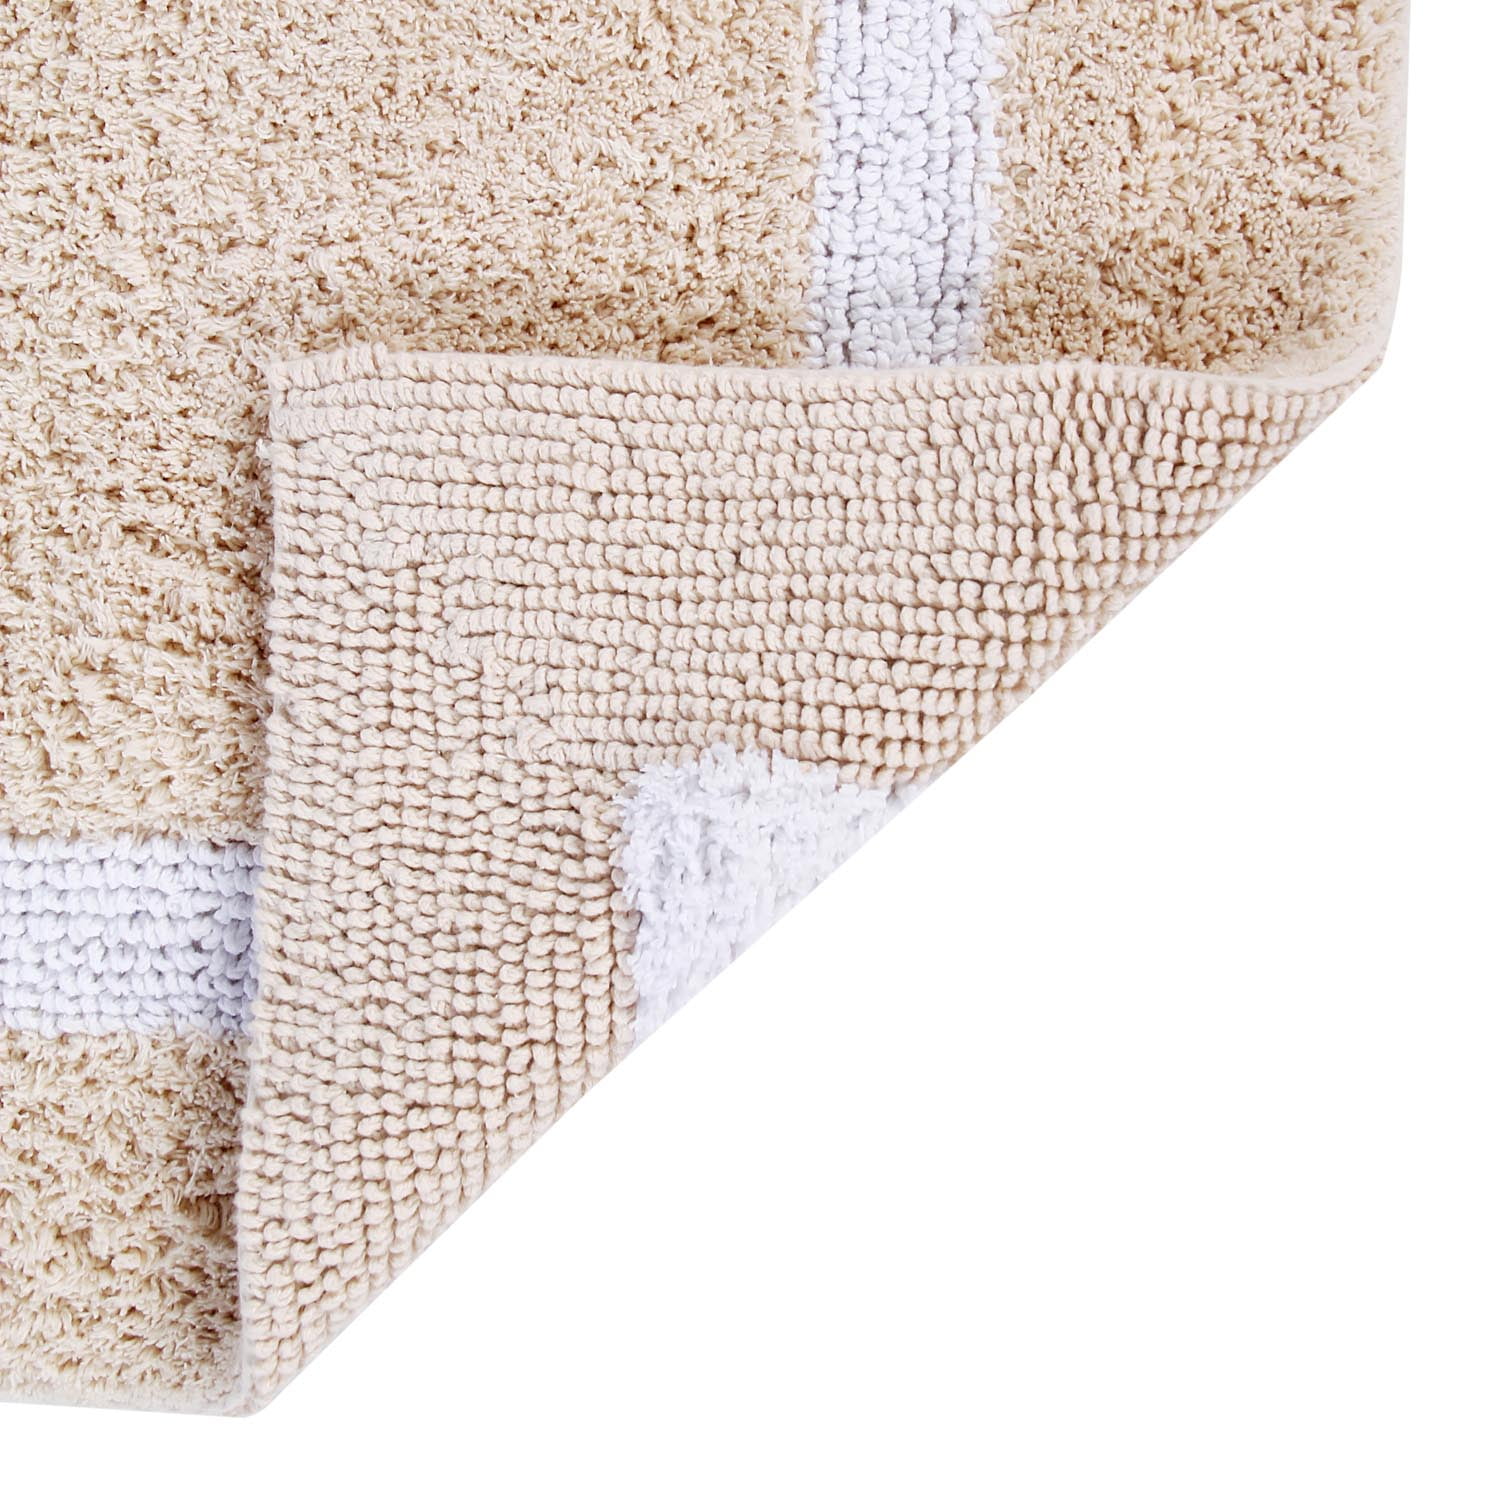 5 Expert Tips To Choose Bath Rugs & Mats - VisualHunt